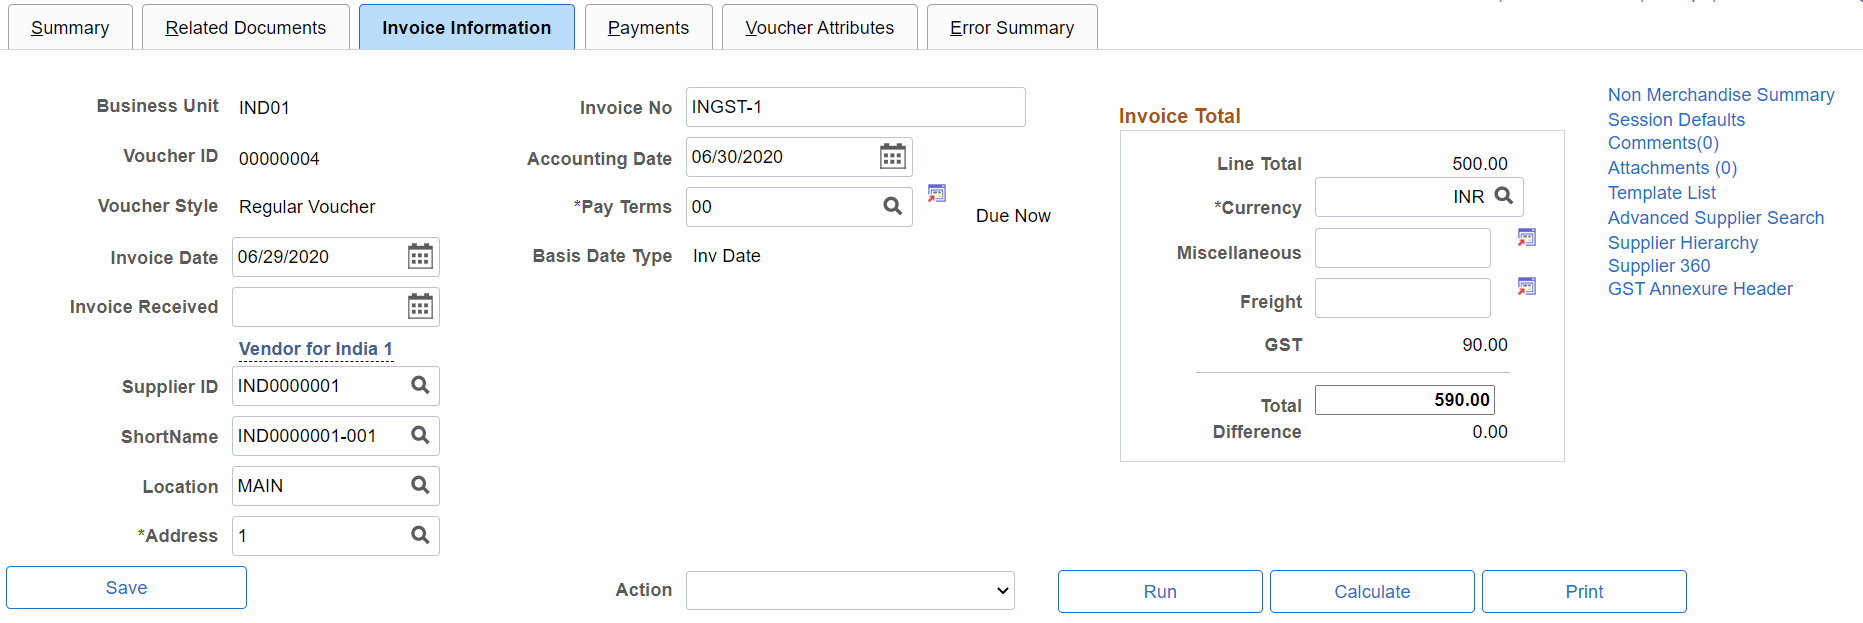 Invoice Information page for regular voucher style (1 of 2)